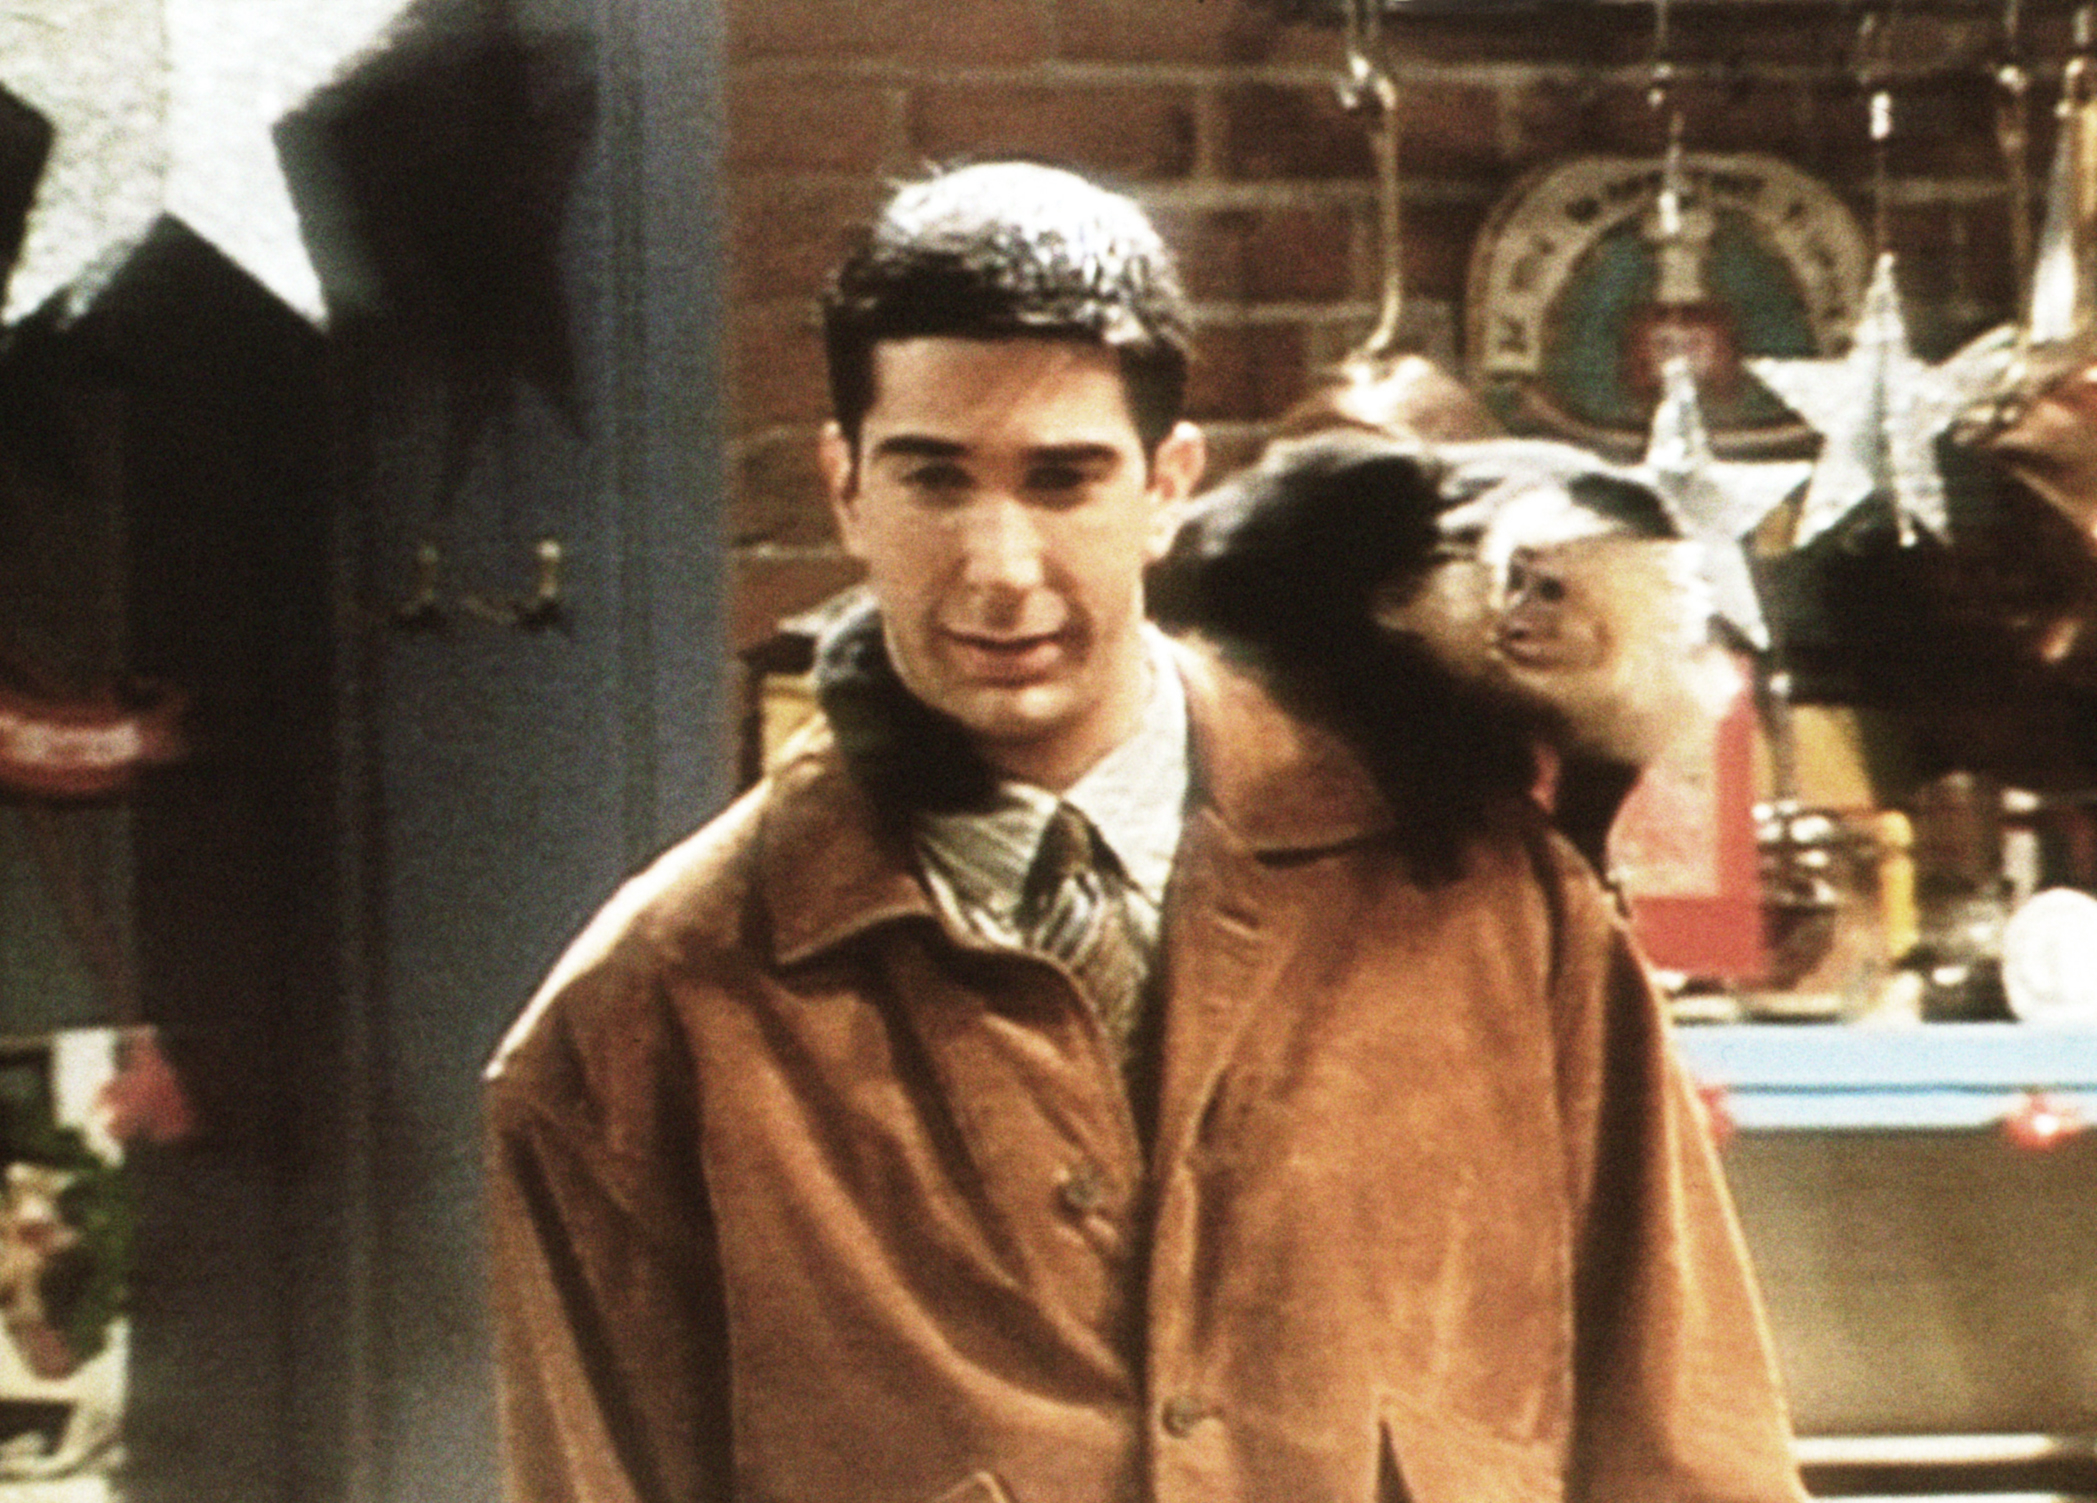 Ross from Friends with Marcel the monkey on his back, in the iconic Central Perk set